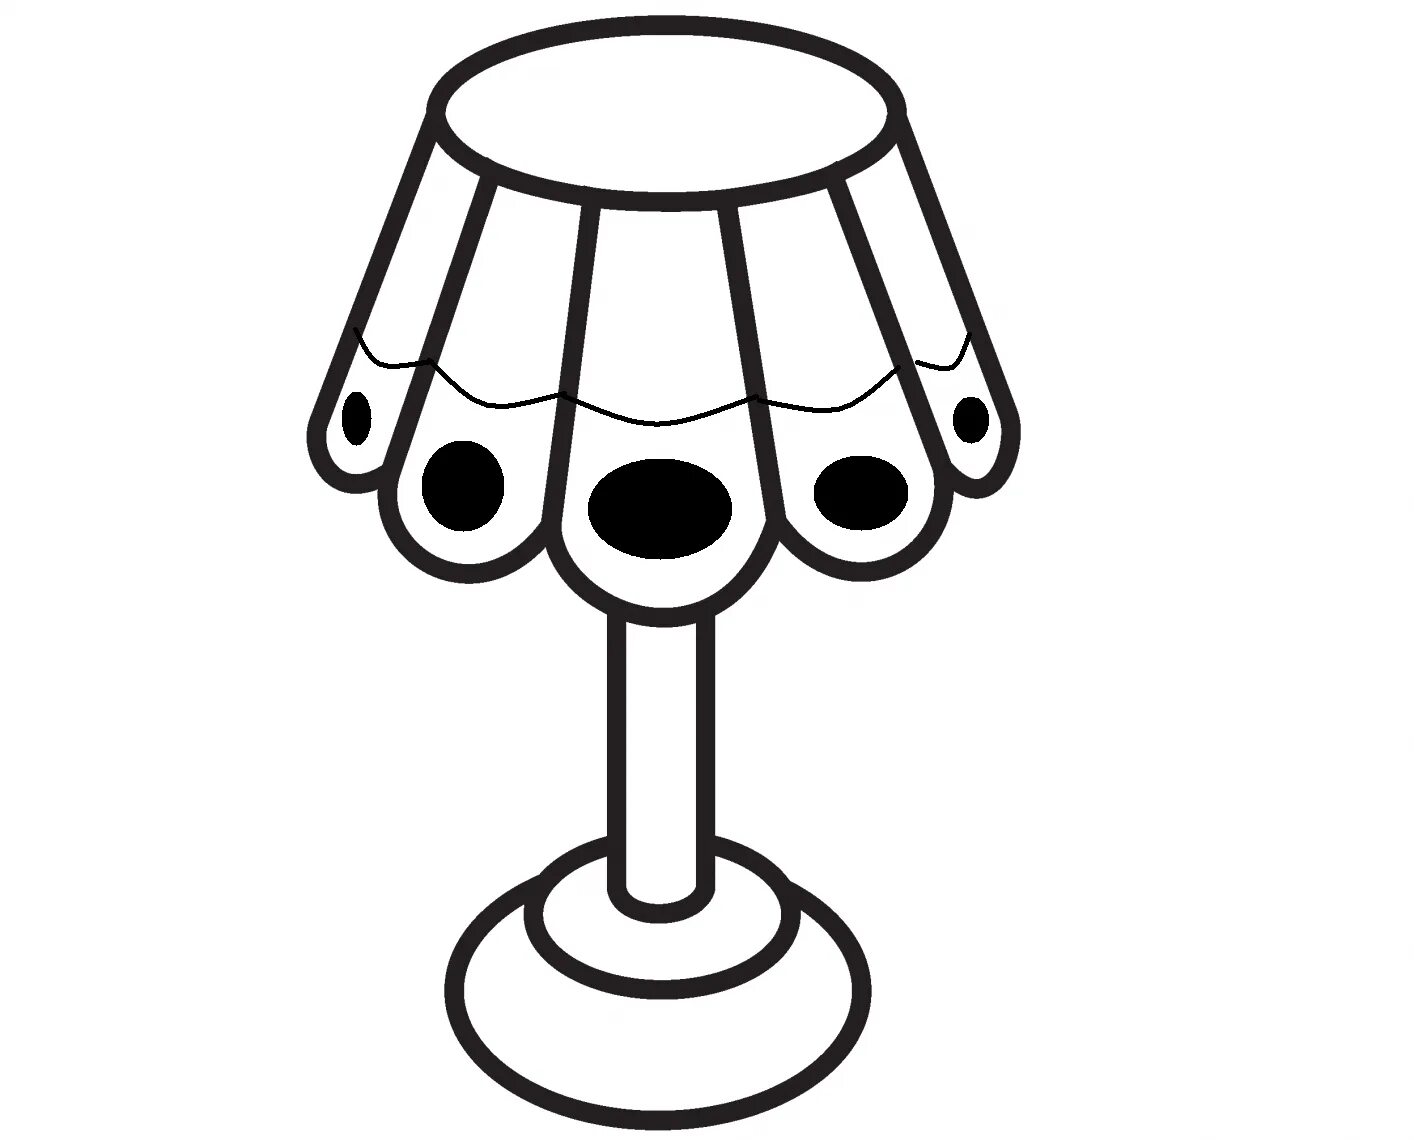 Coloring book stylish floor lamp for children